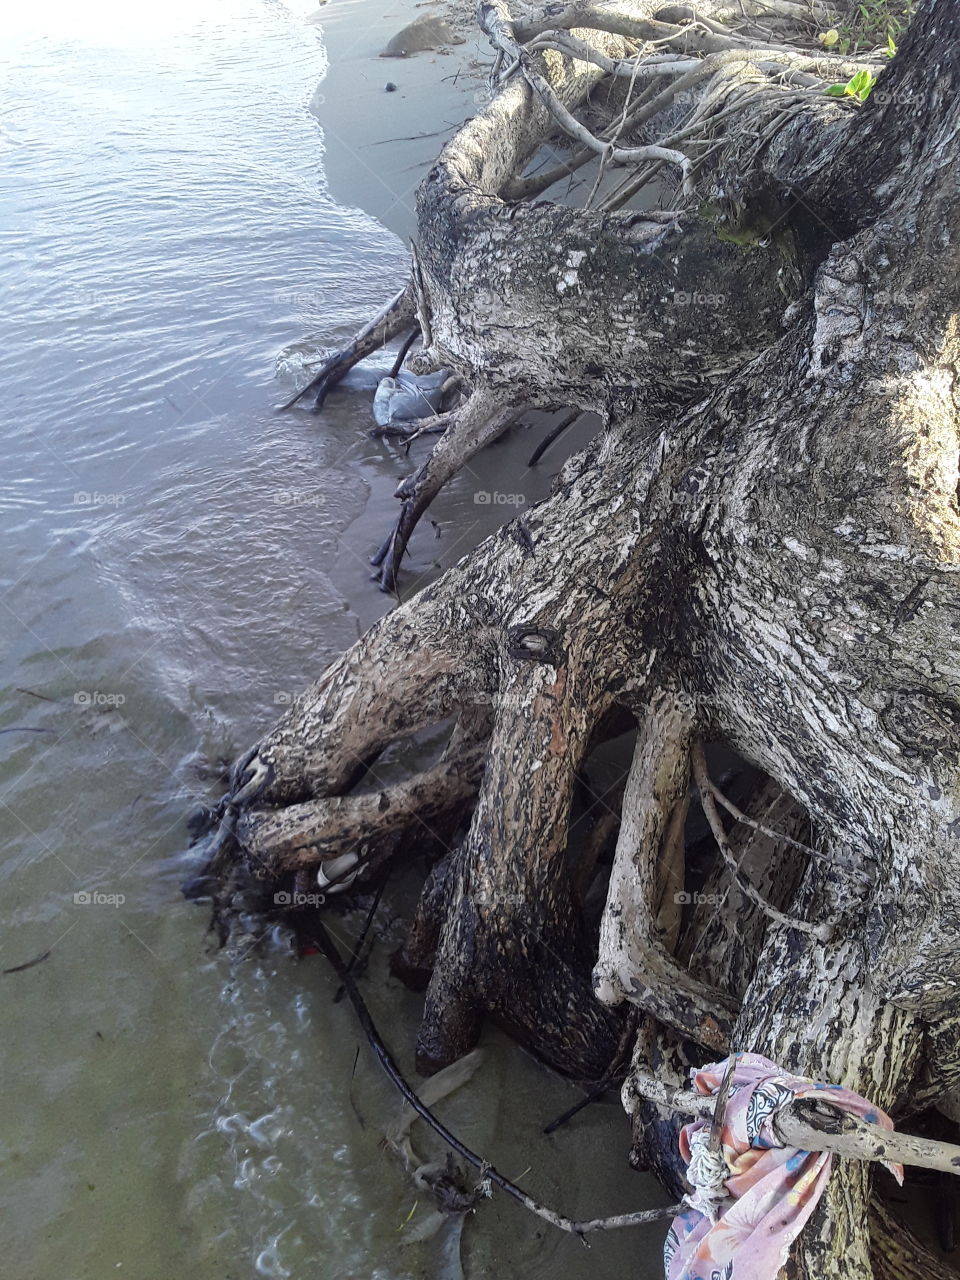 Exposed tree root is a sign of vontinuod sea erosion